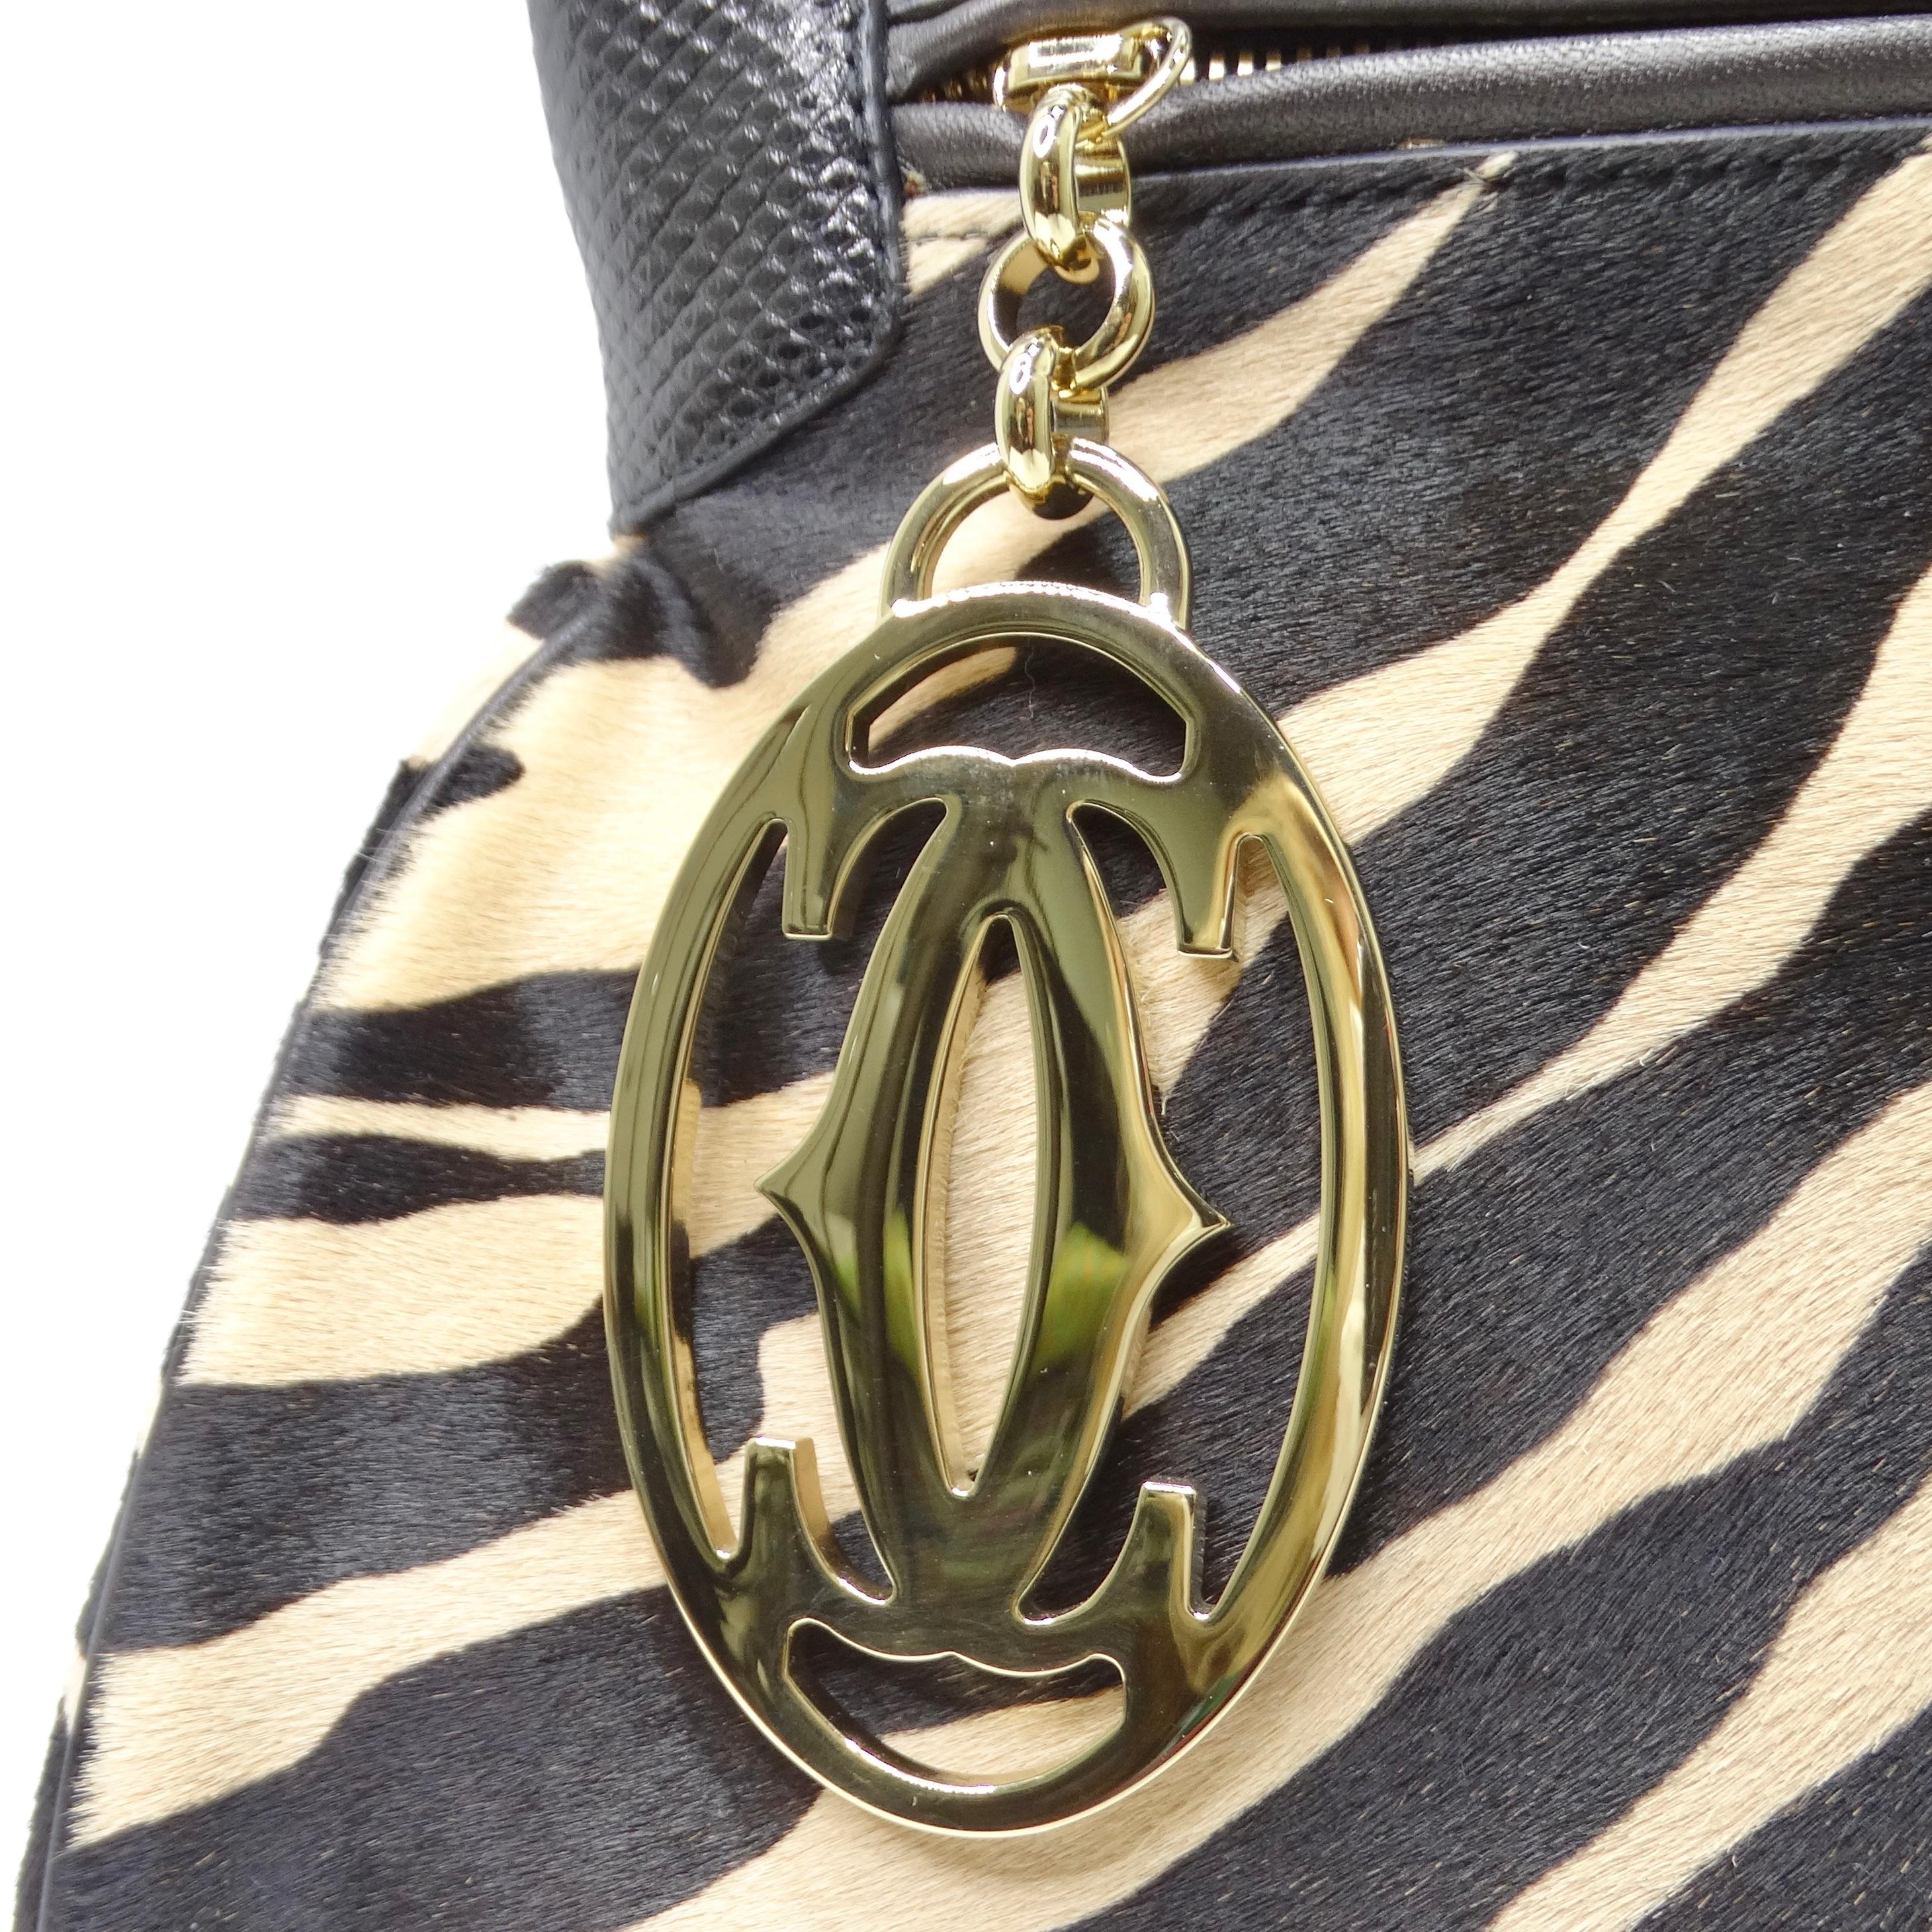 Introducing the Cartier Zebra Print Pony Hair 90s Shoulder Bag, a bold and luxurious accessory that exudes sophistication and style. Cartier's Marcello style shoulder bag features a striking zebra print pony hair exterior contrasted by black leather